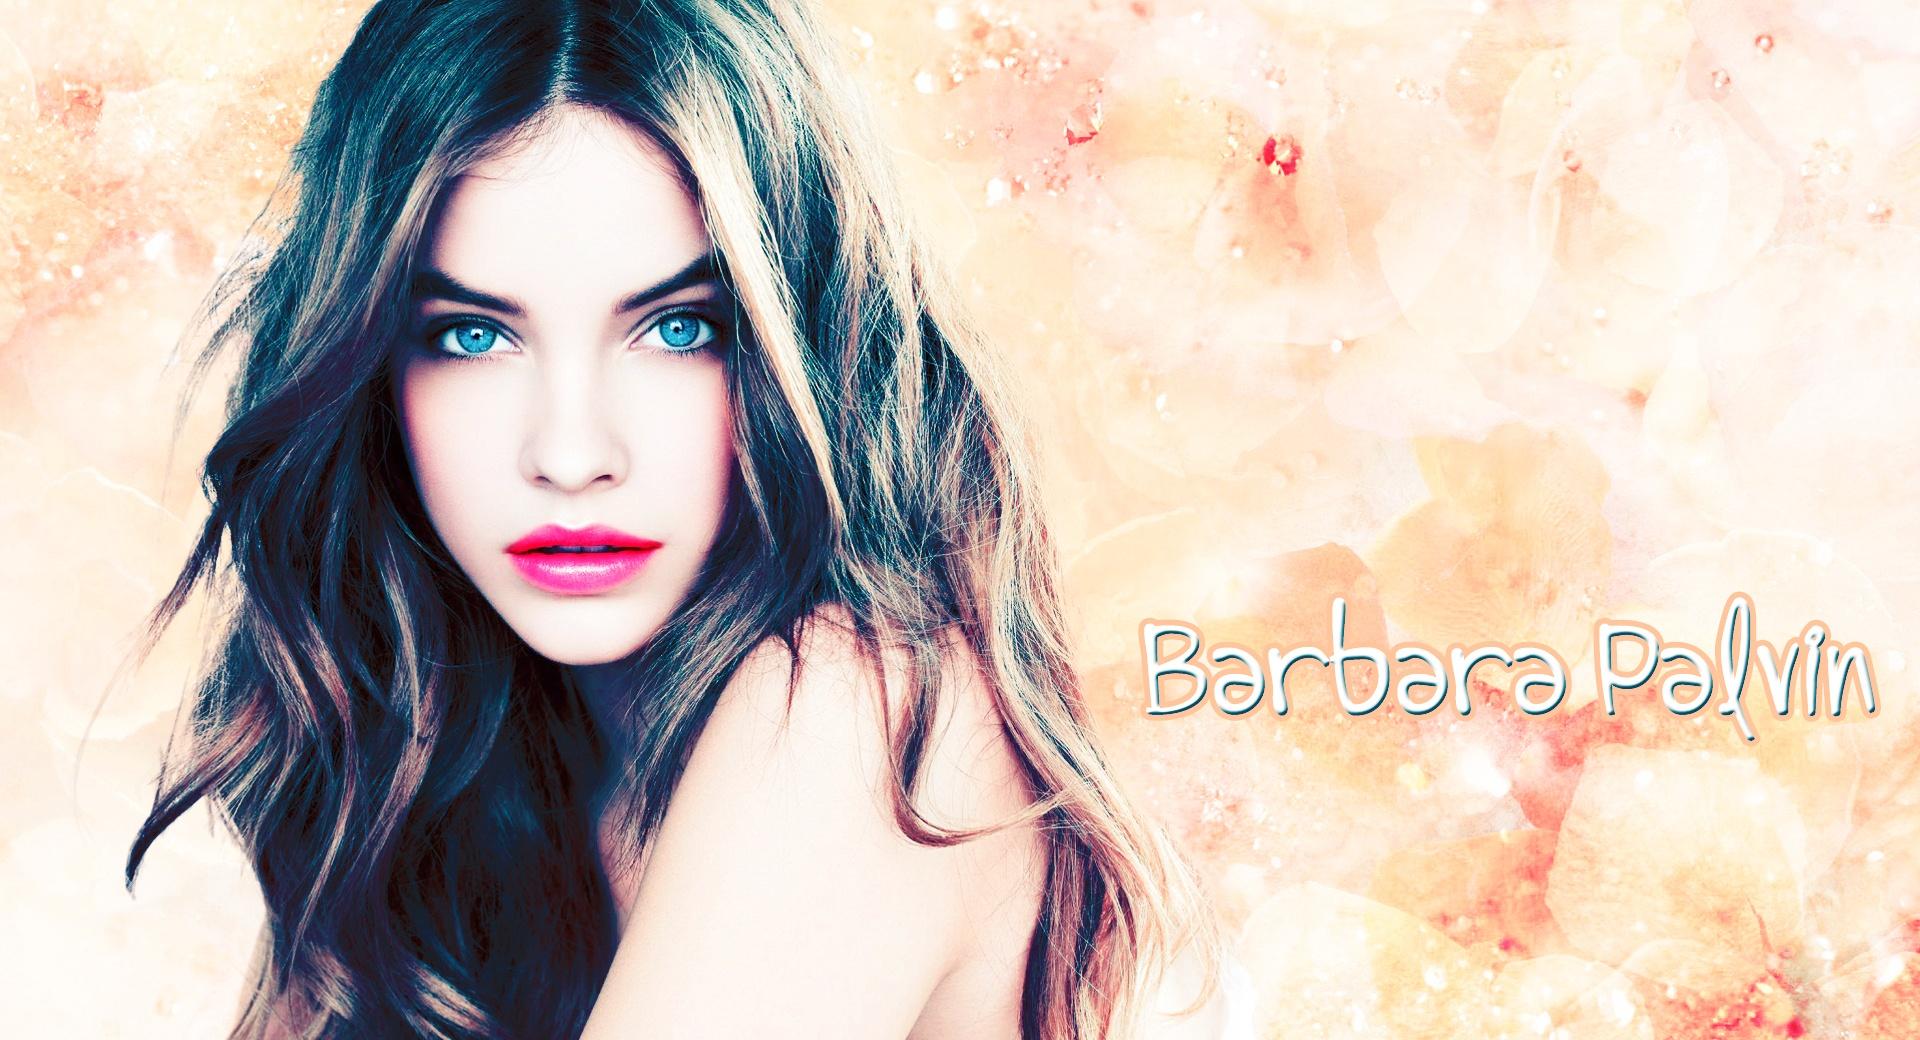 Barbara Palvin Background wallpapers HD quality